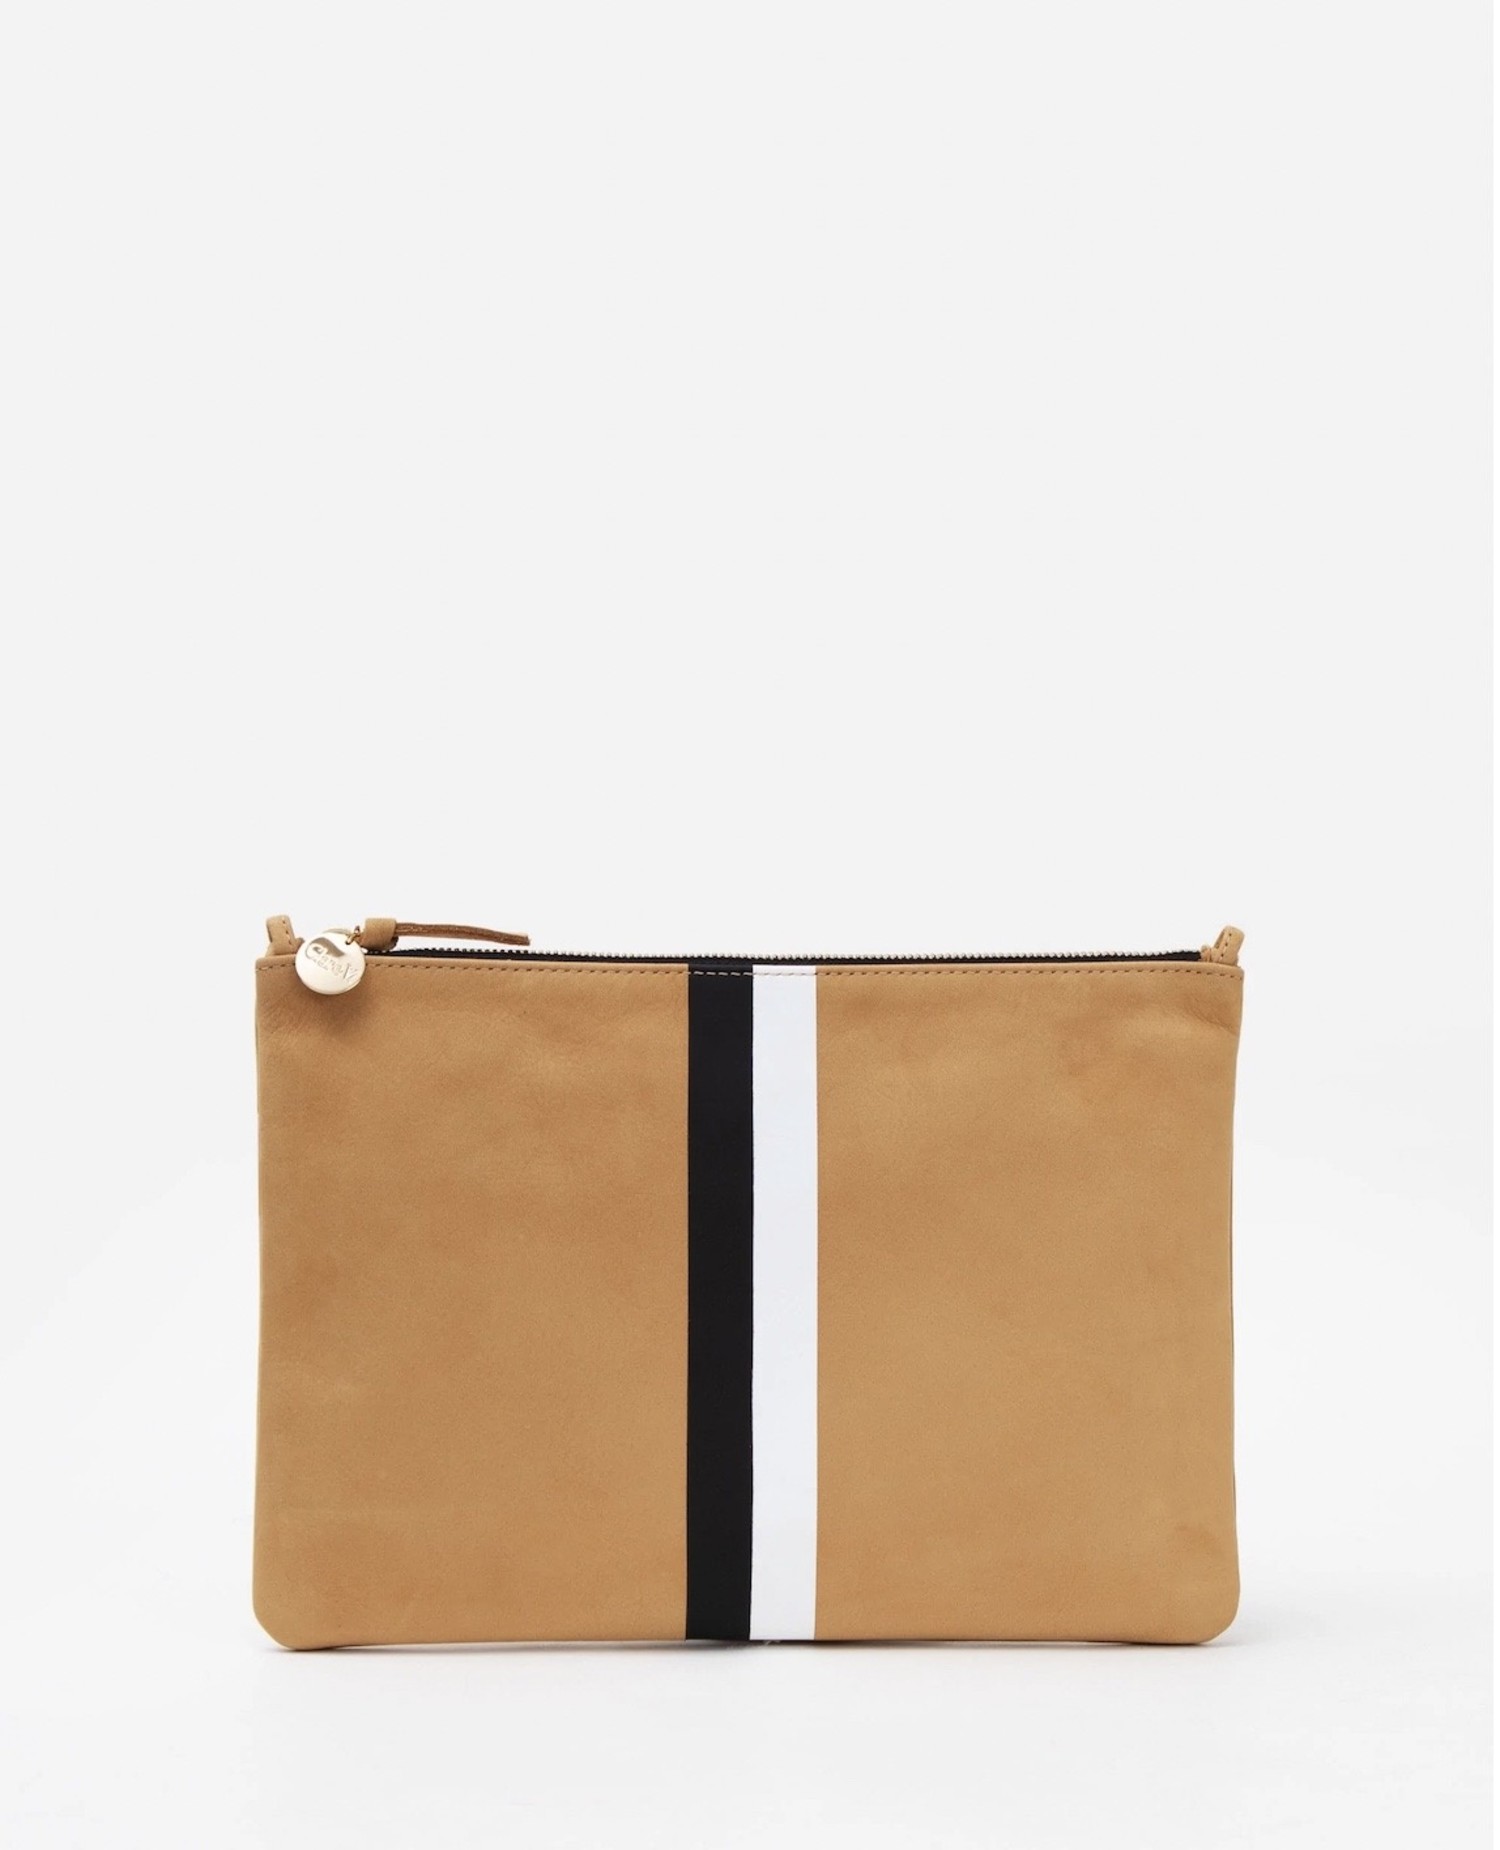 Clare V. Flat Clutch With Tabs in Natural